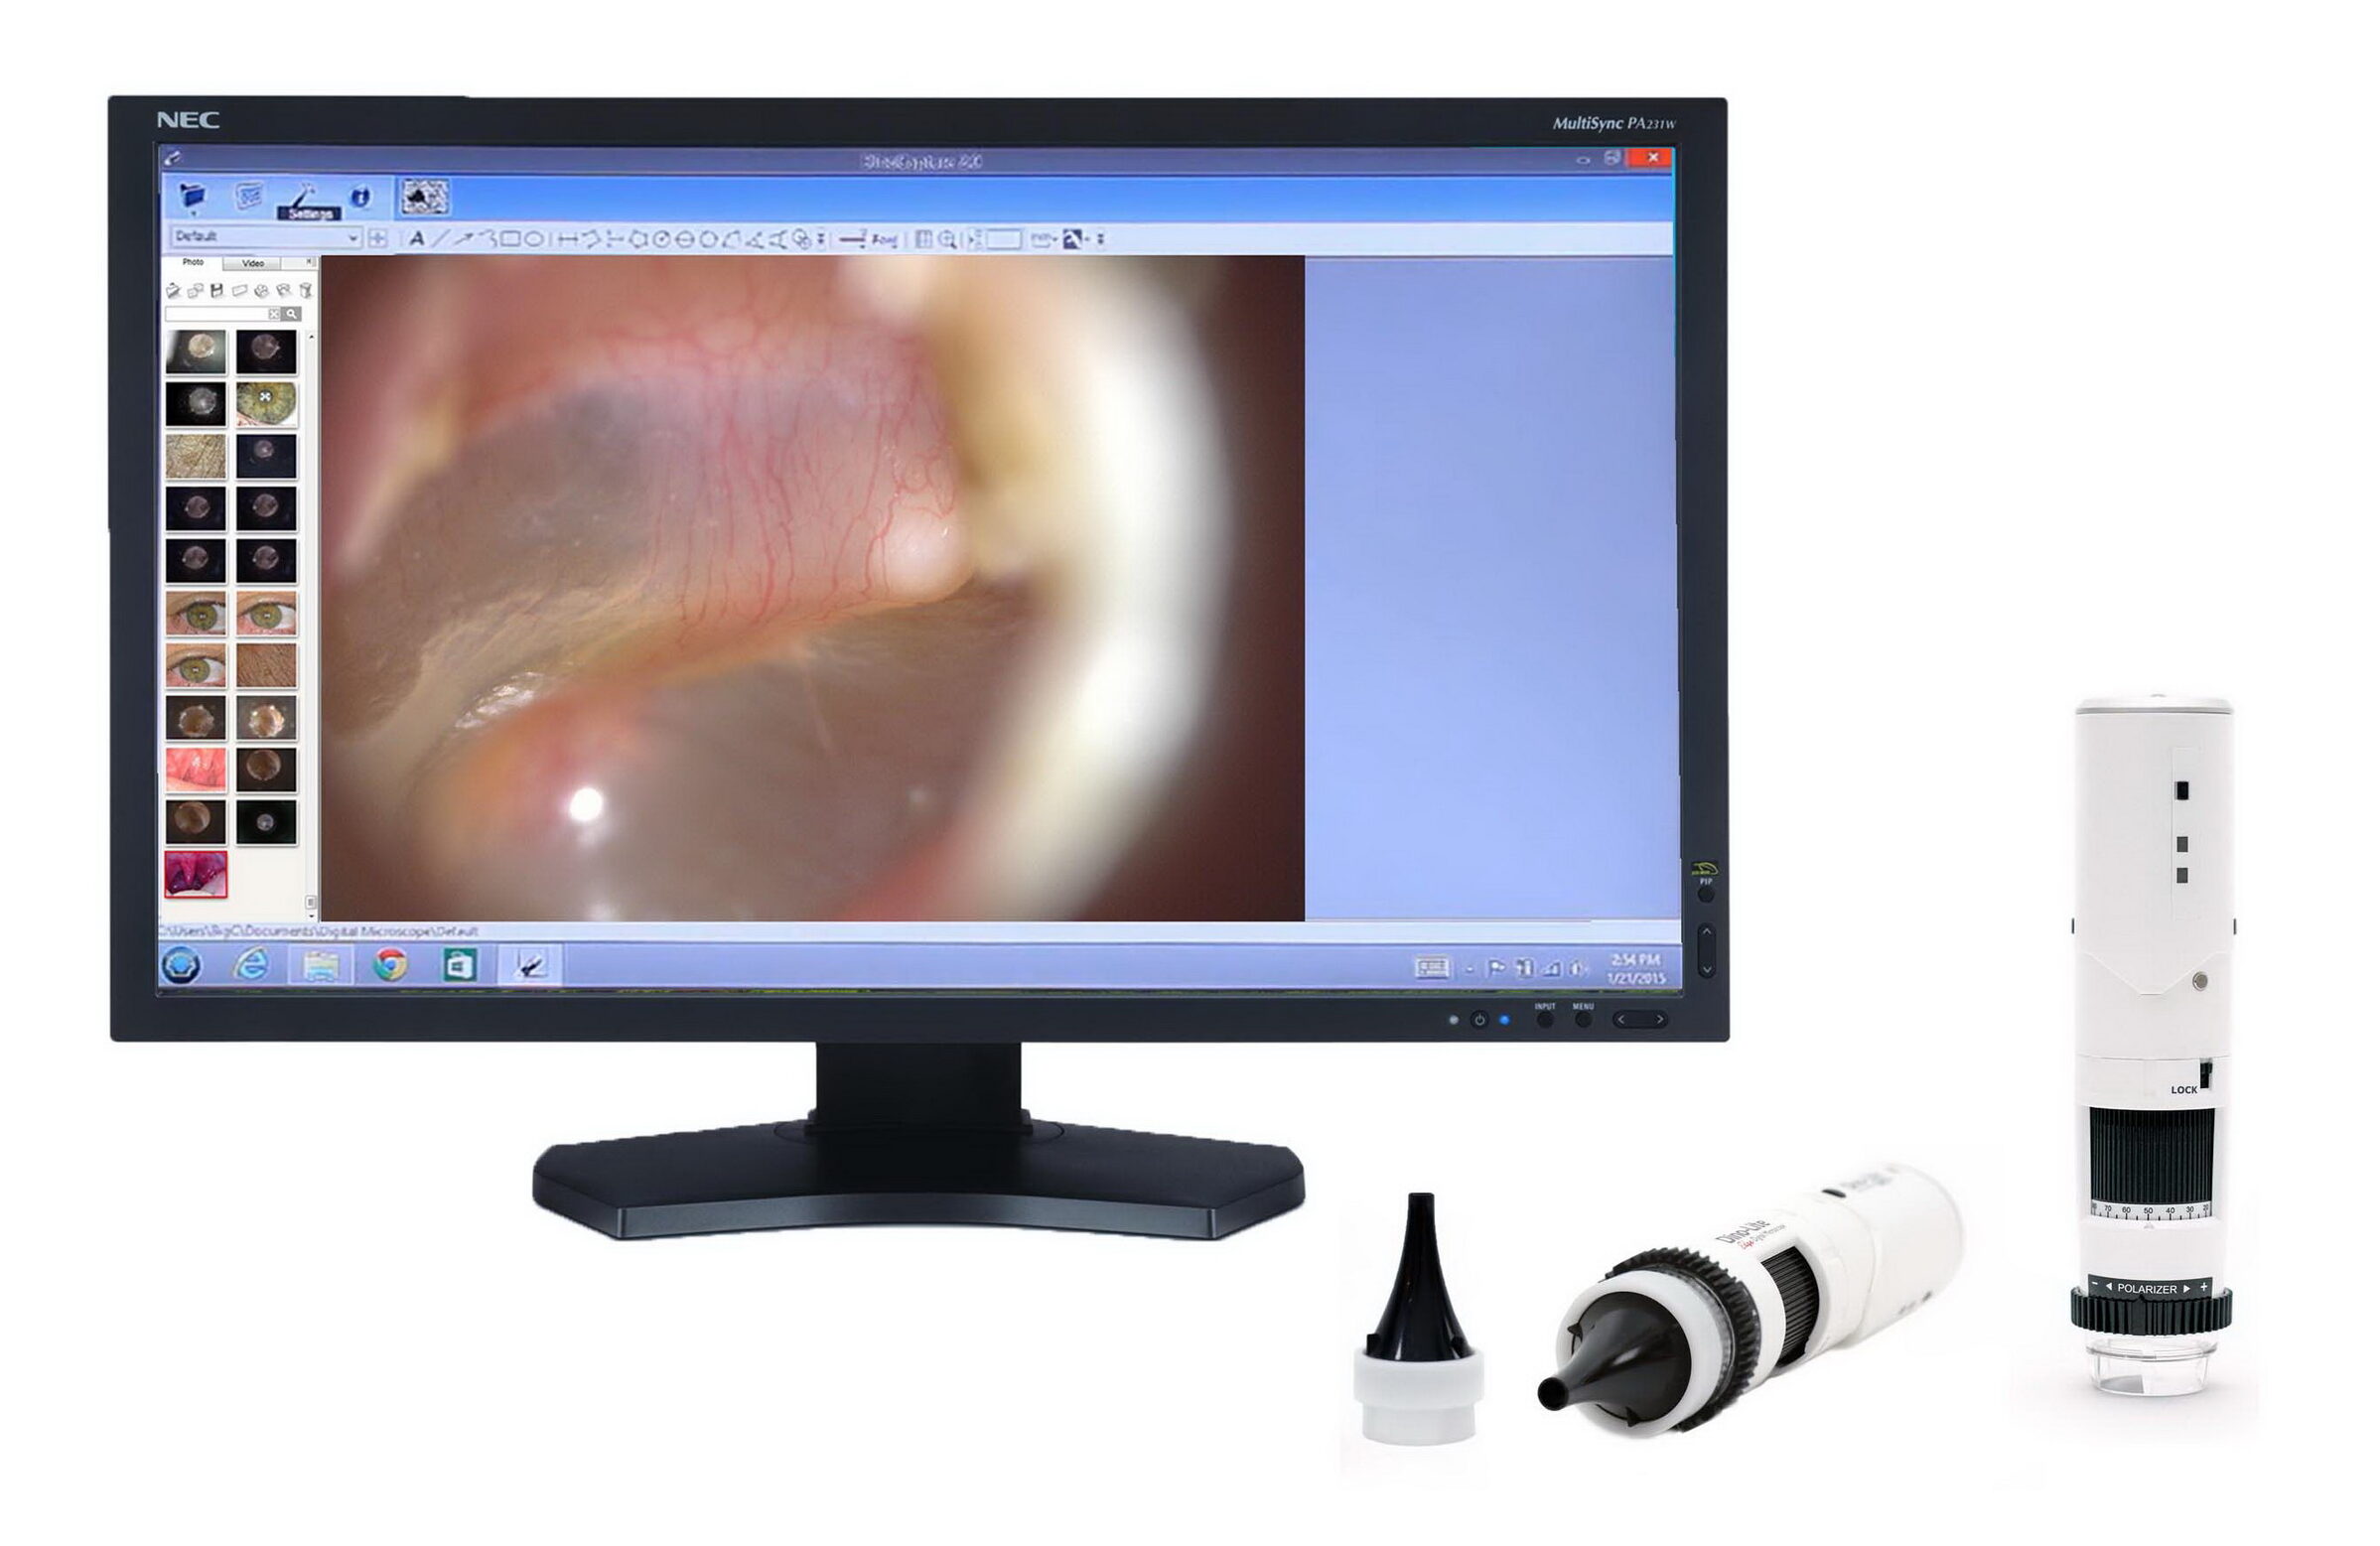 Otoscope includes software, all updates, and tech support